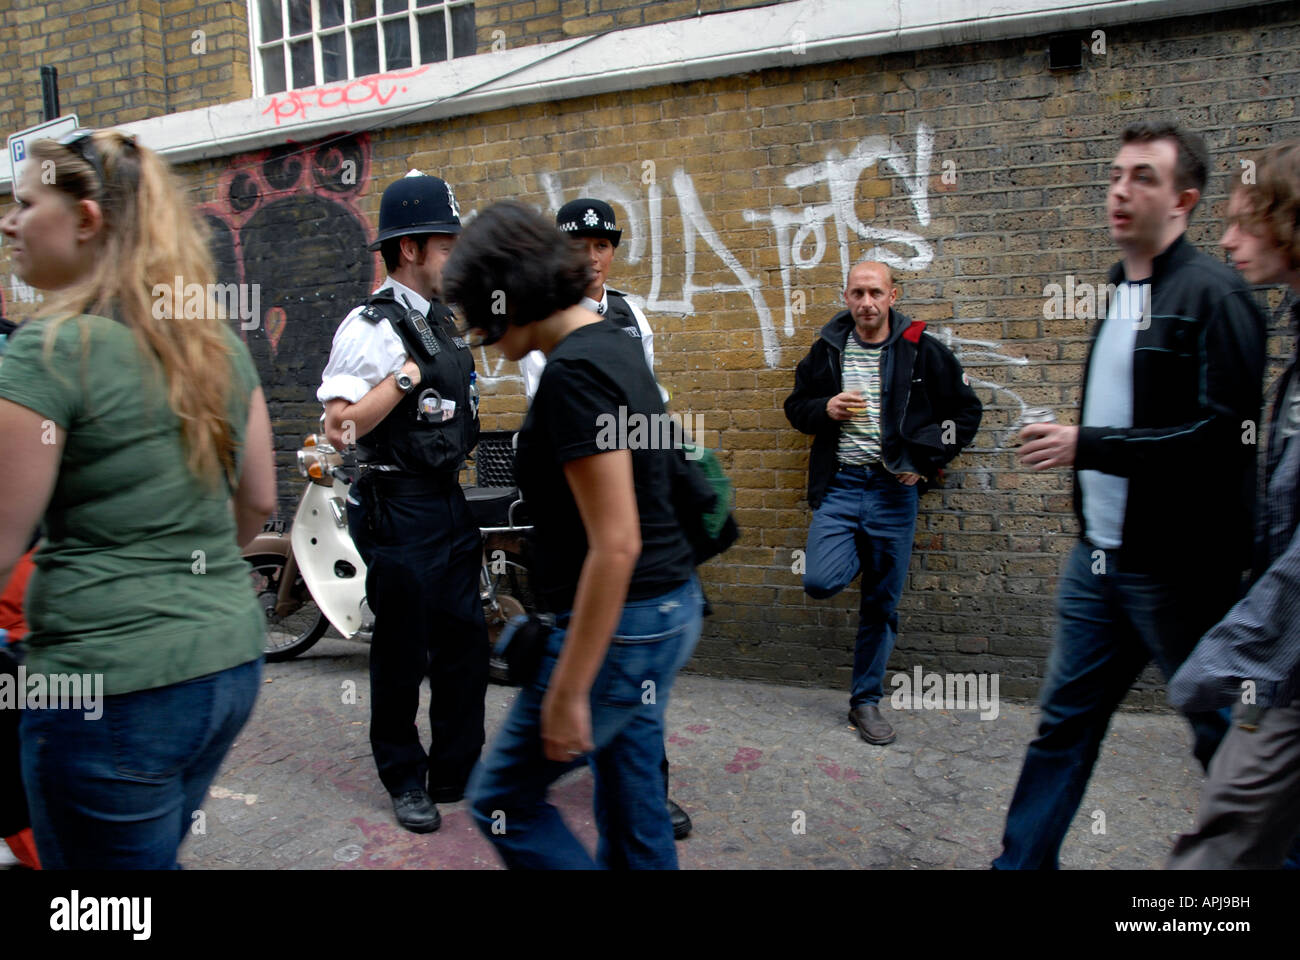 Brick Lane police and youth Stock Photo